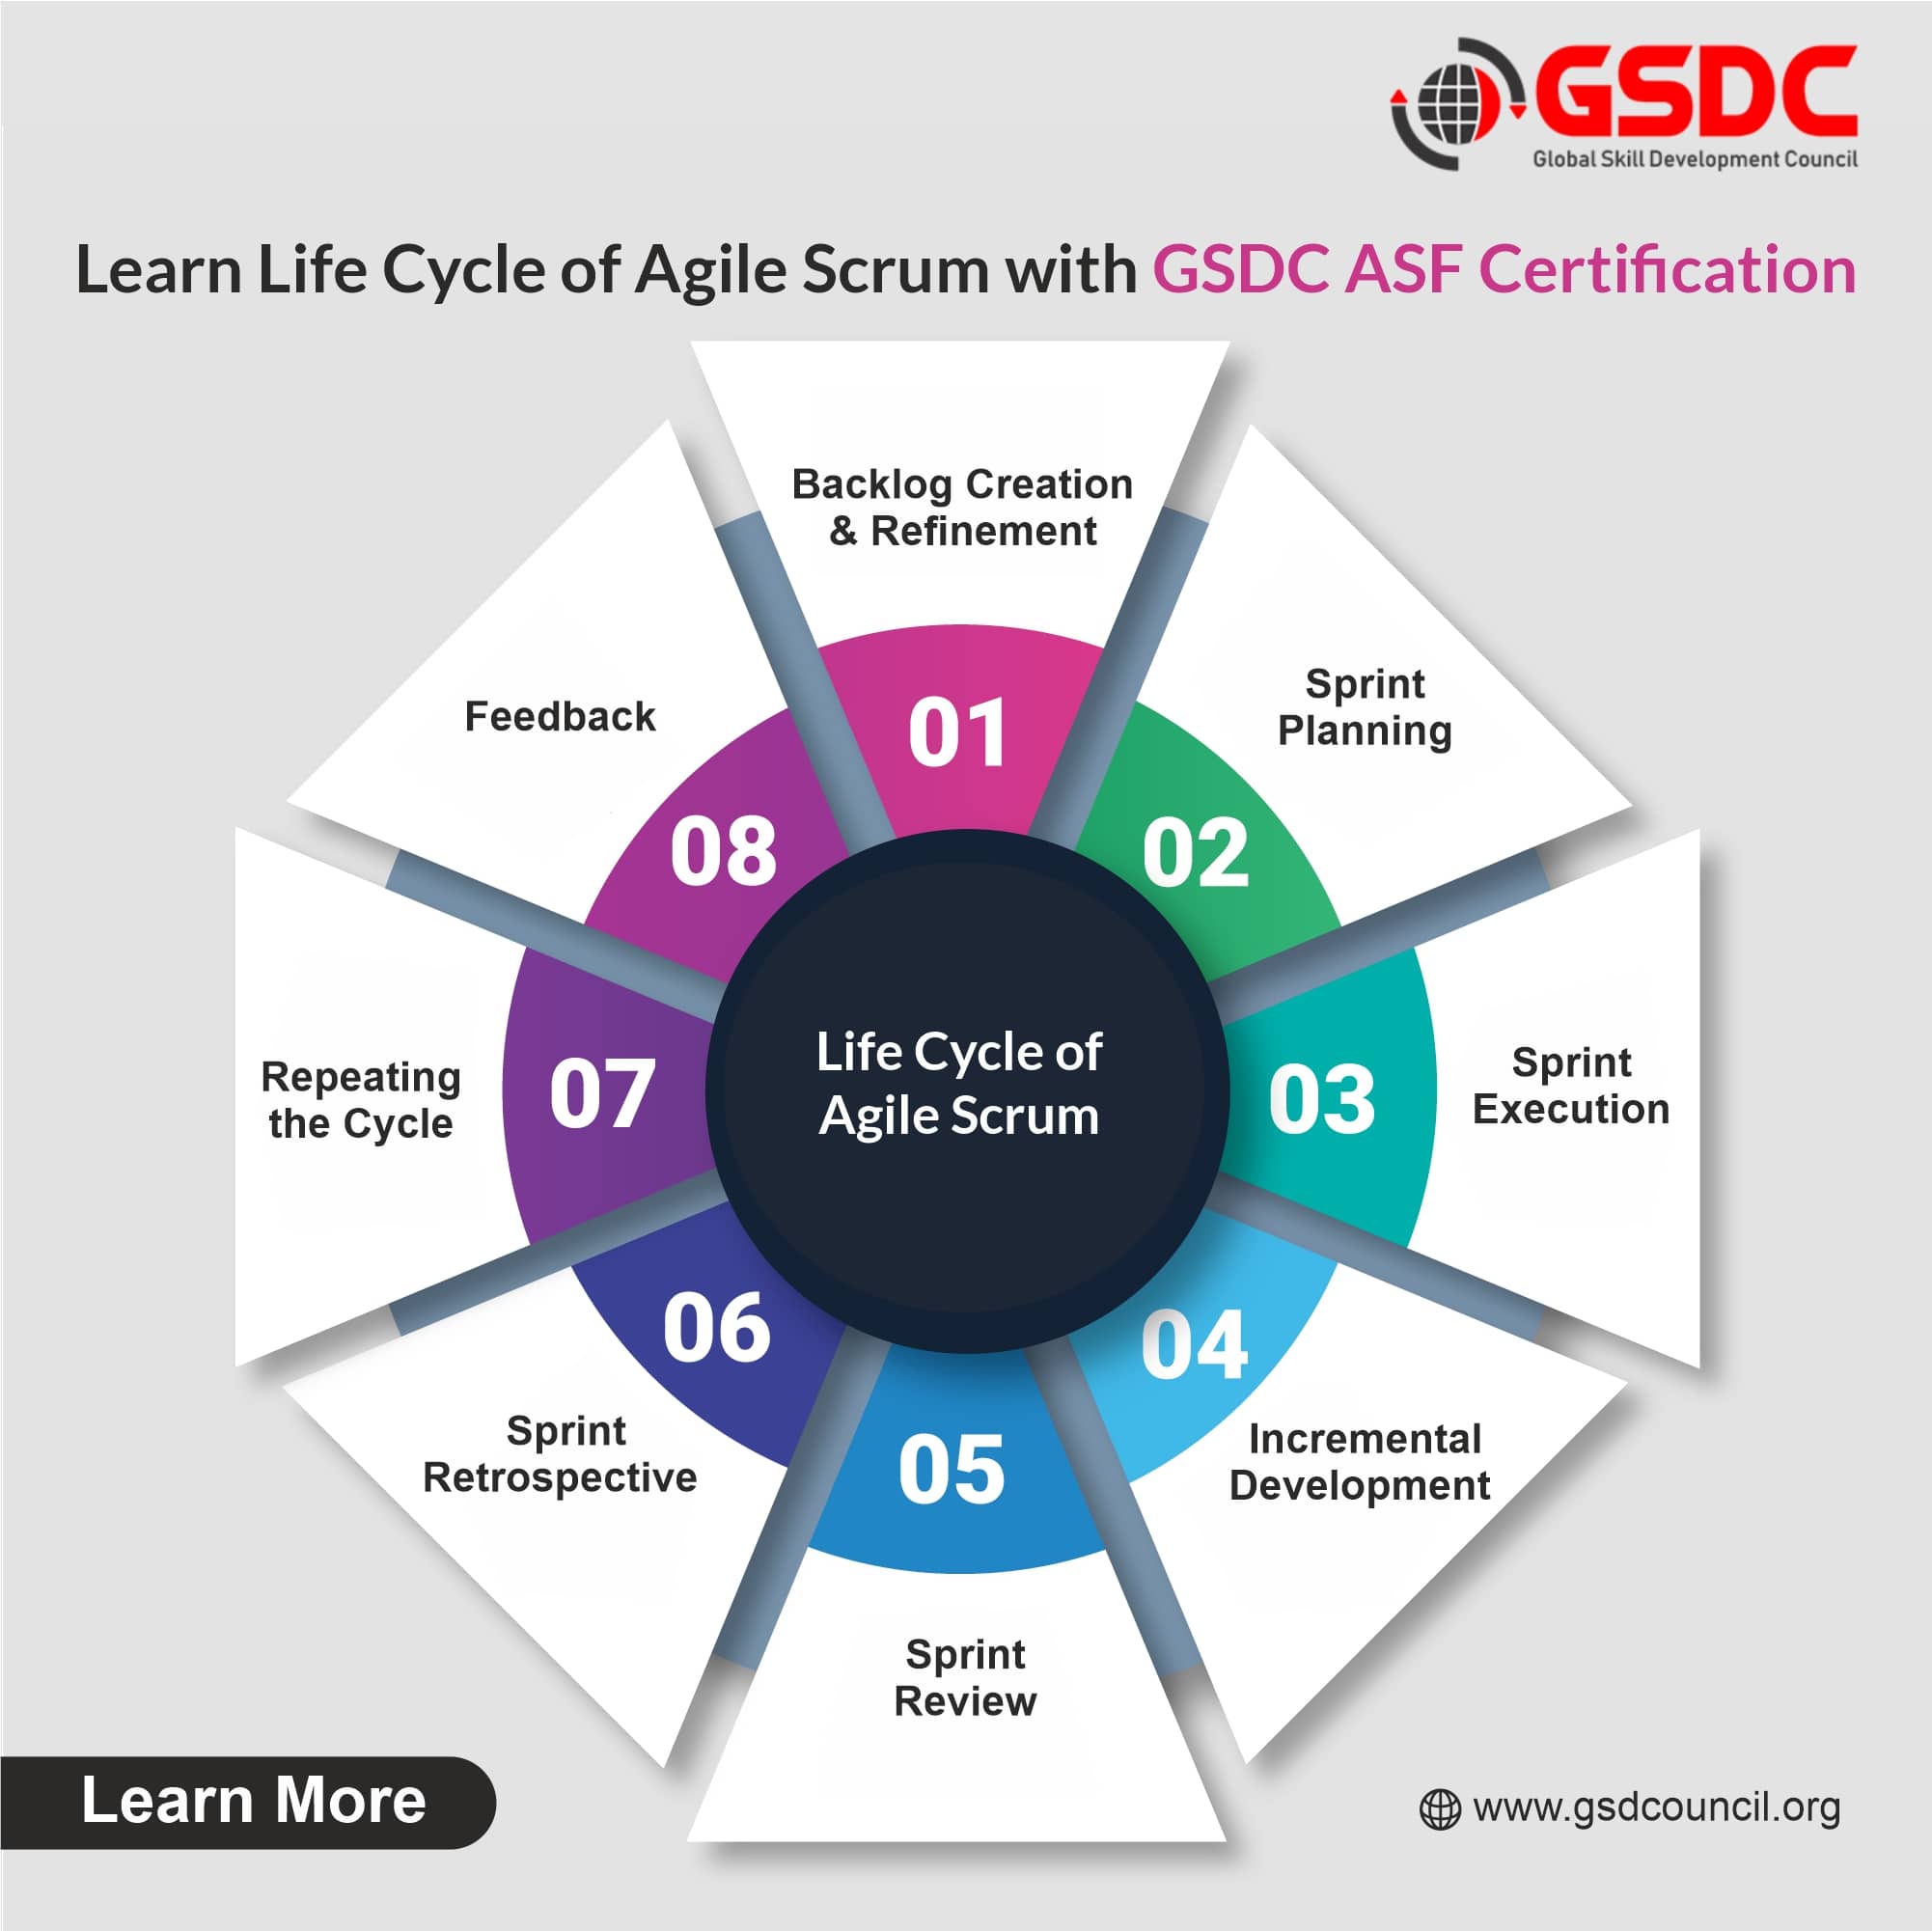 Learn Life Cycle of Agile Scrum With Agile Scrum Foundation Certification